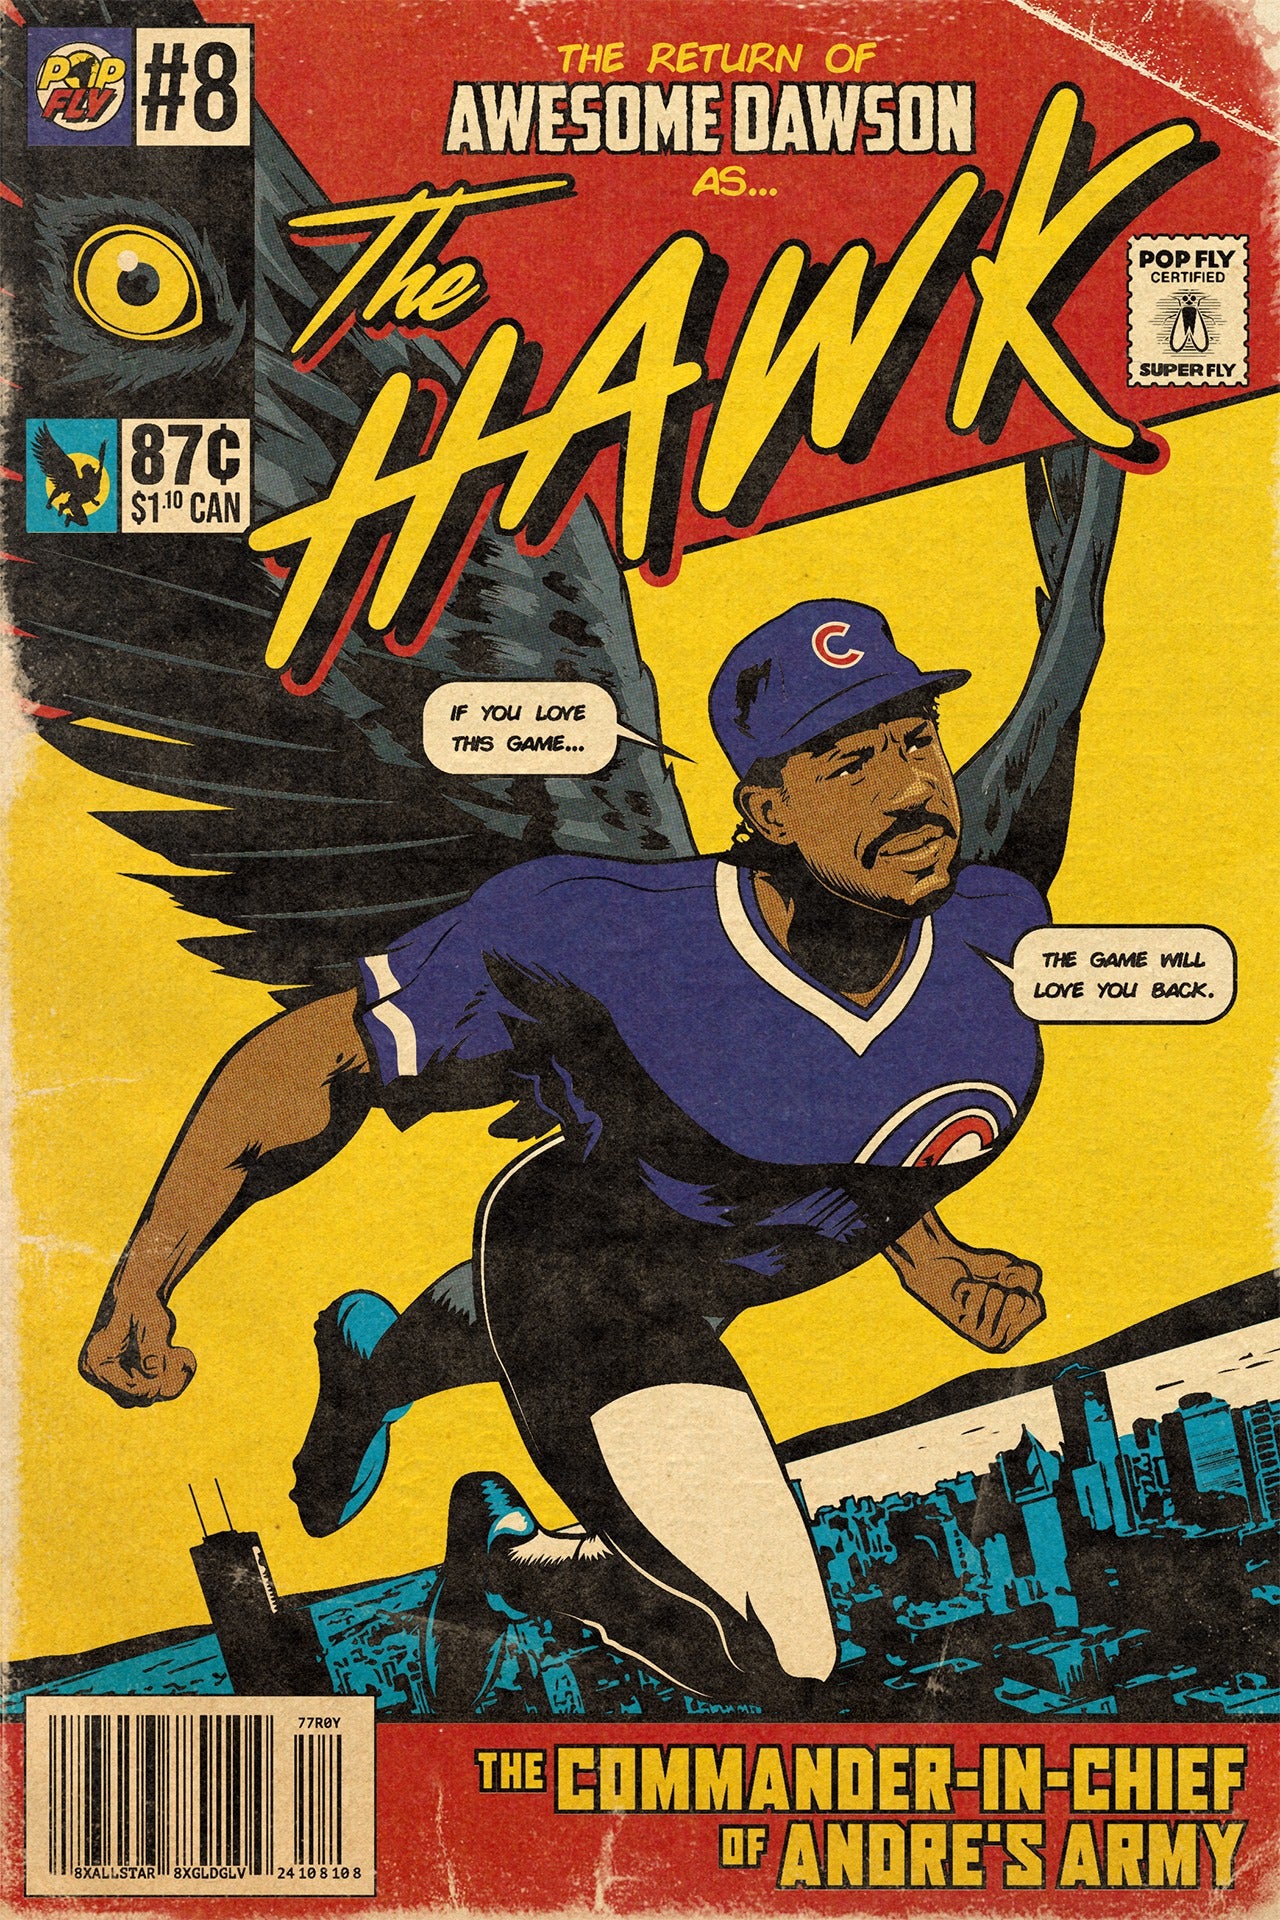 31. (SOLD OUT) "The Hawk" Andre Dawson 7" X 10.5" Art Print